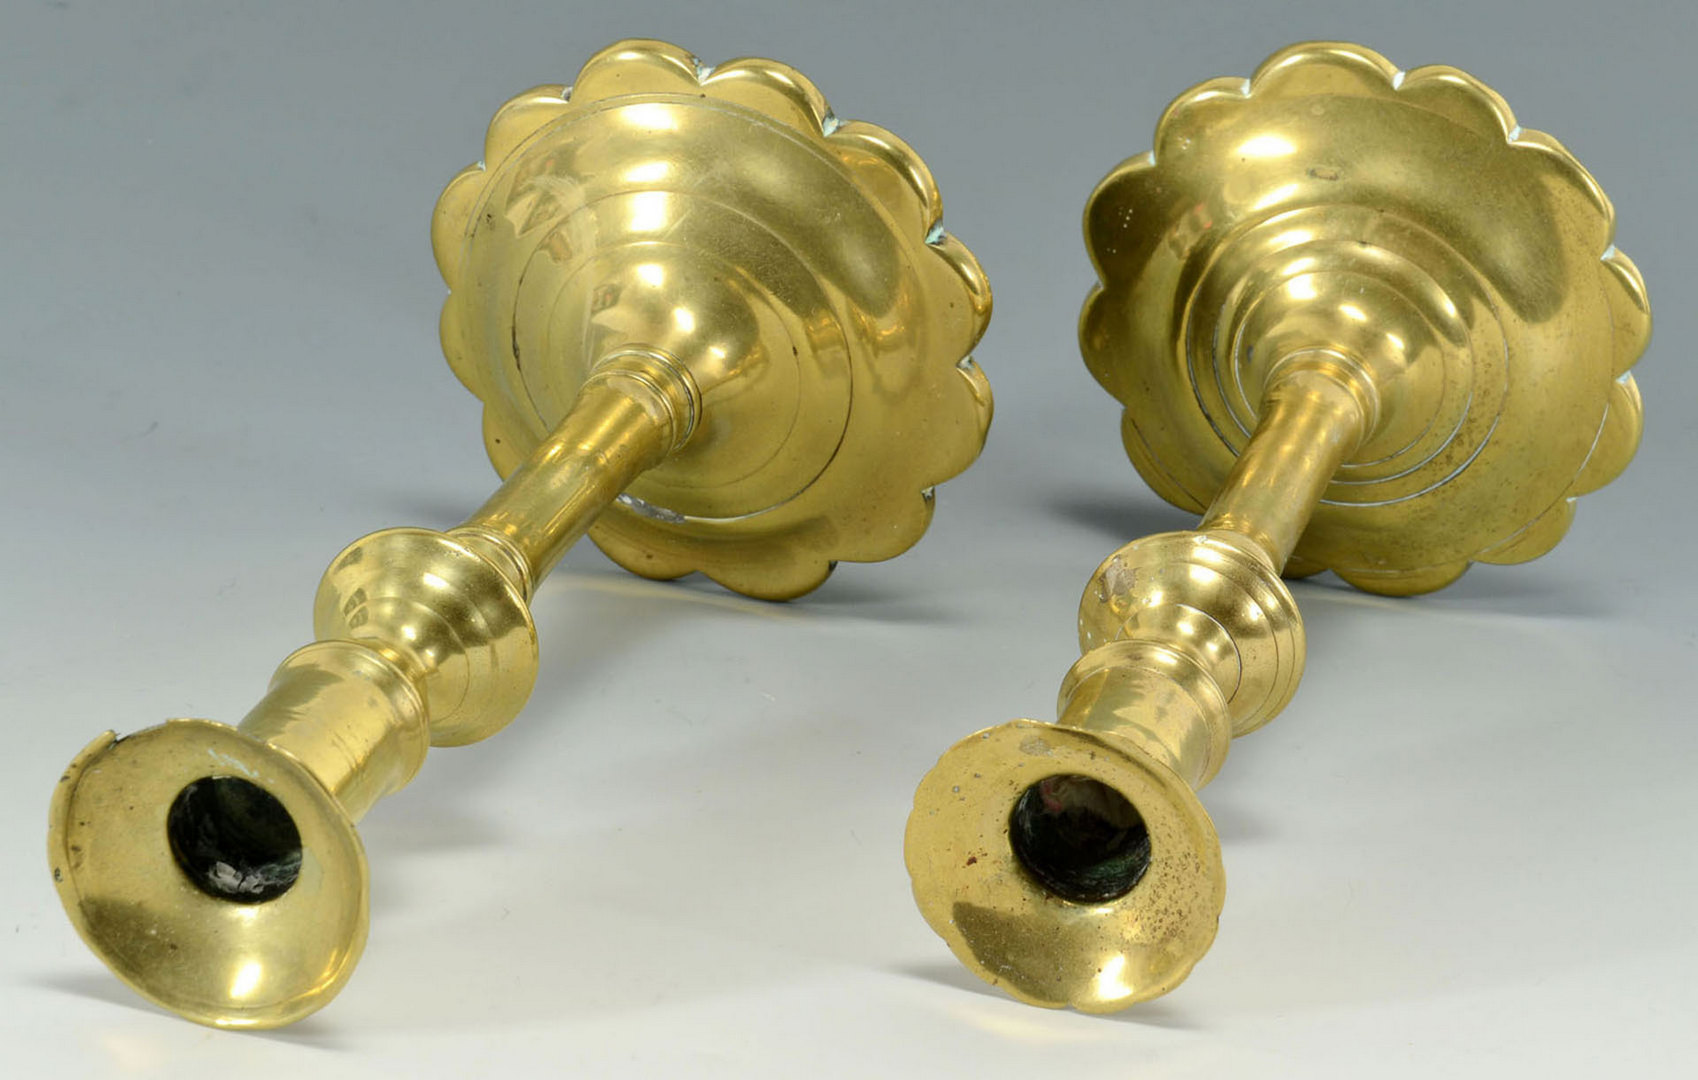 Lot 251: Group of 4 Queen Anne 18th c. Brass Candlesticks